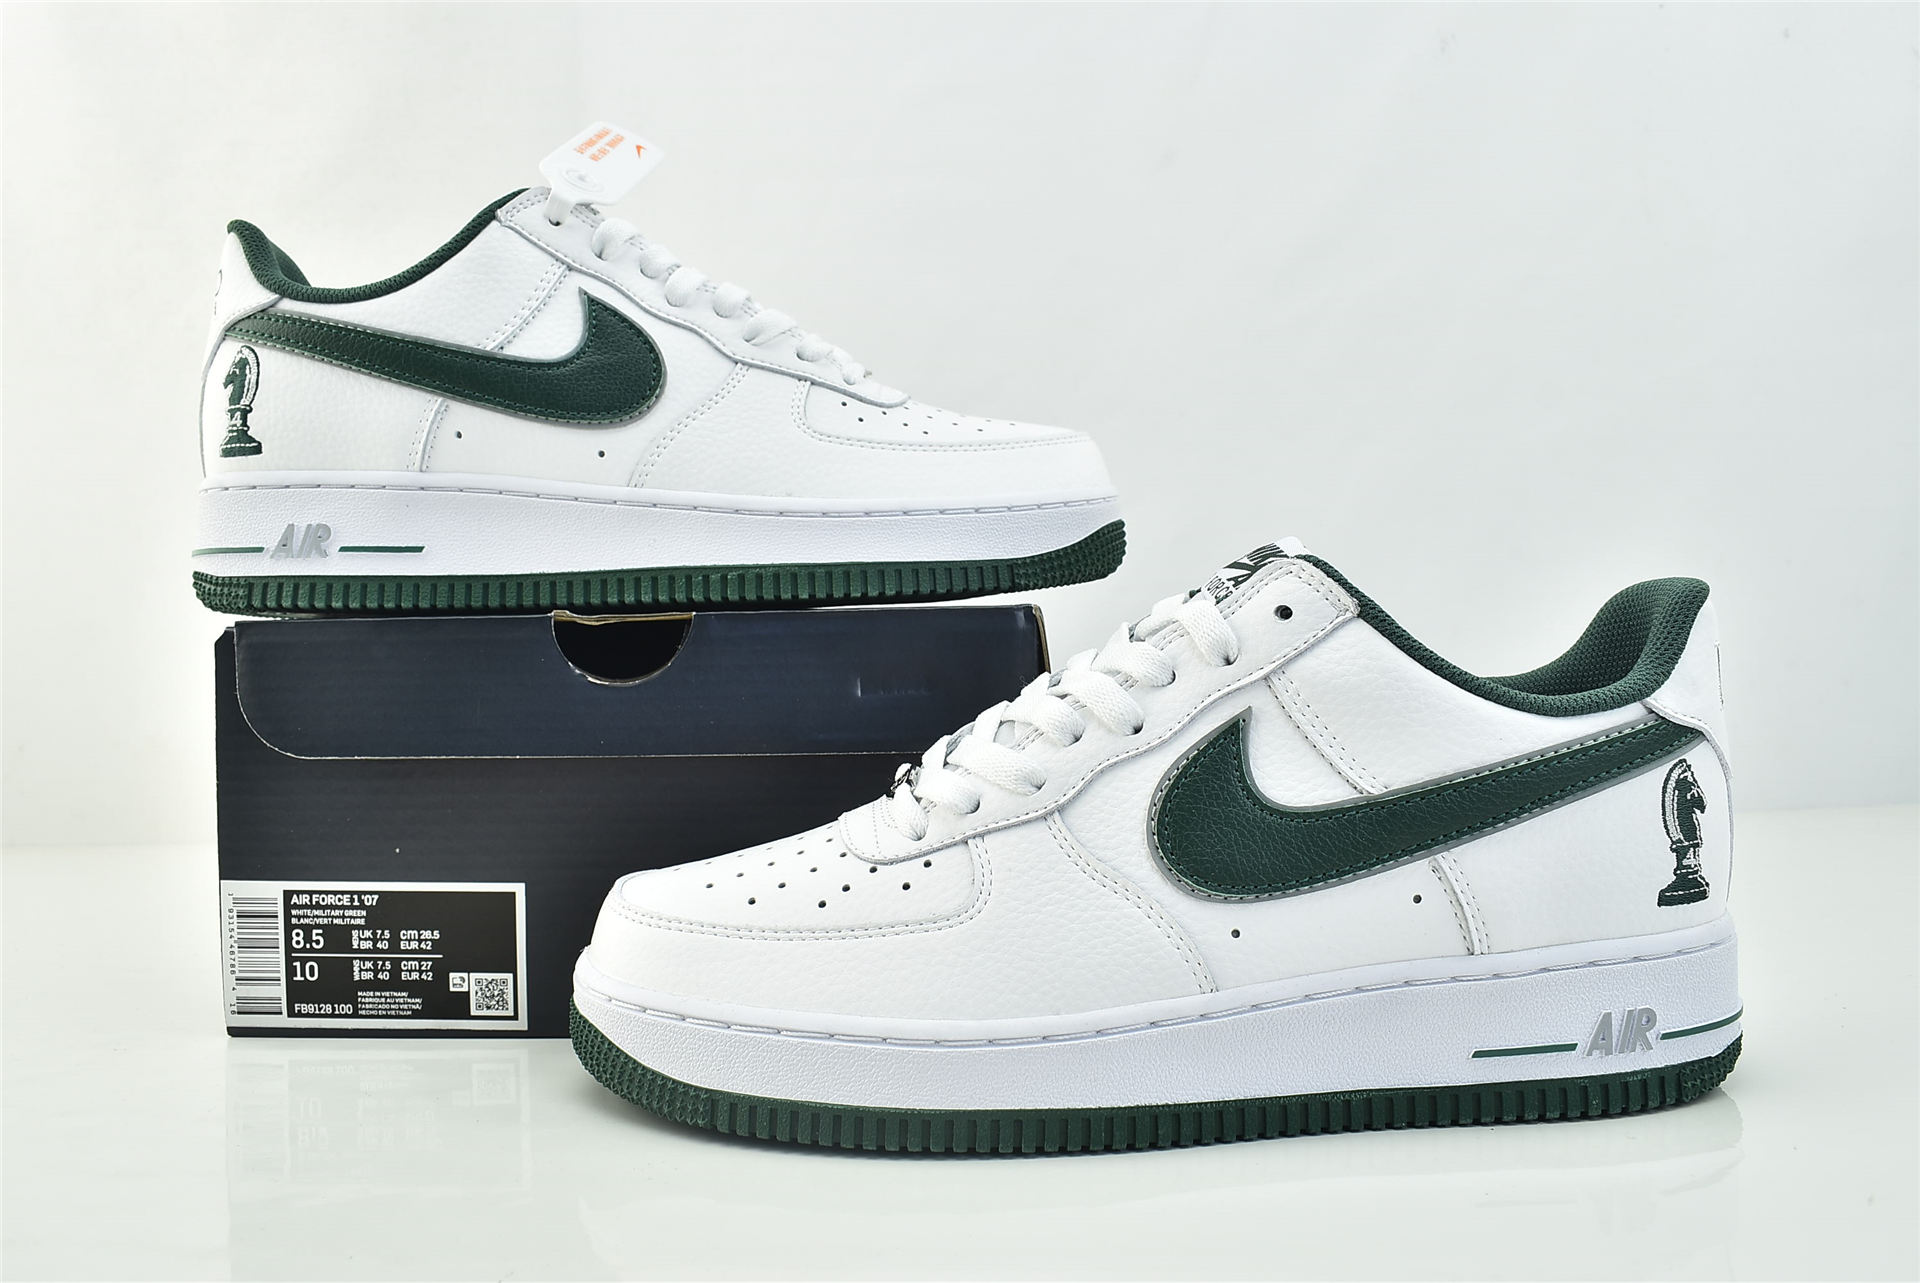 NIKE AIR FORCE 1 LOW – “FOUR HORSMEN”